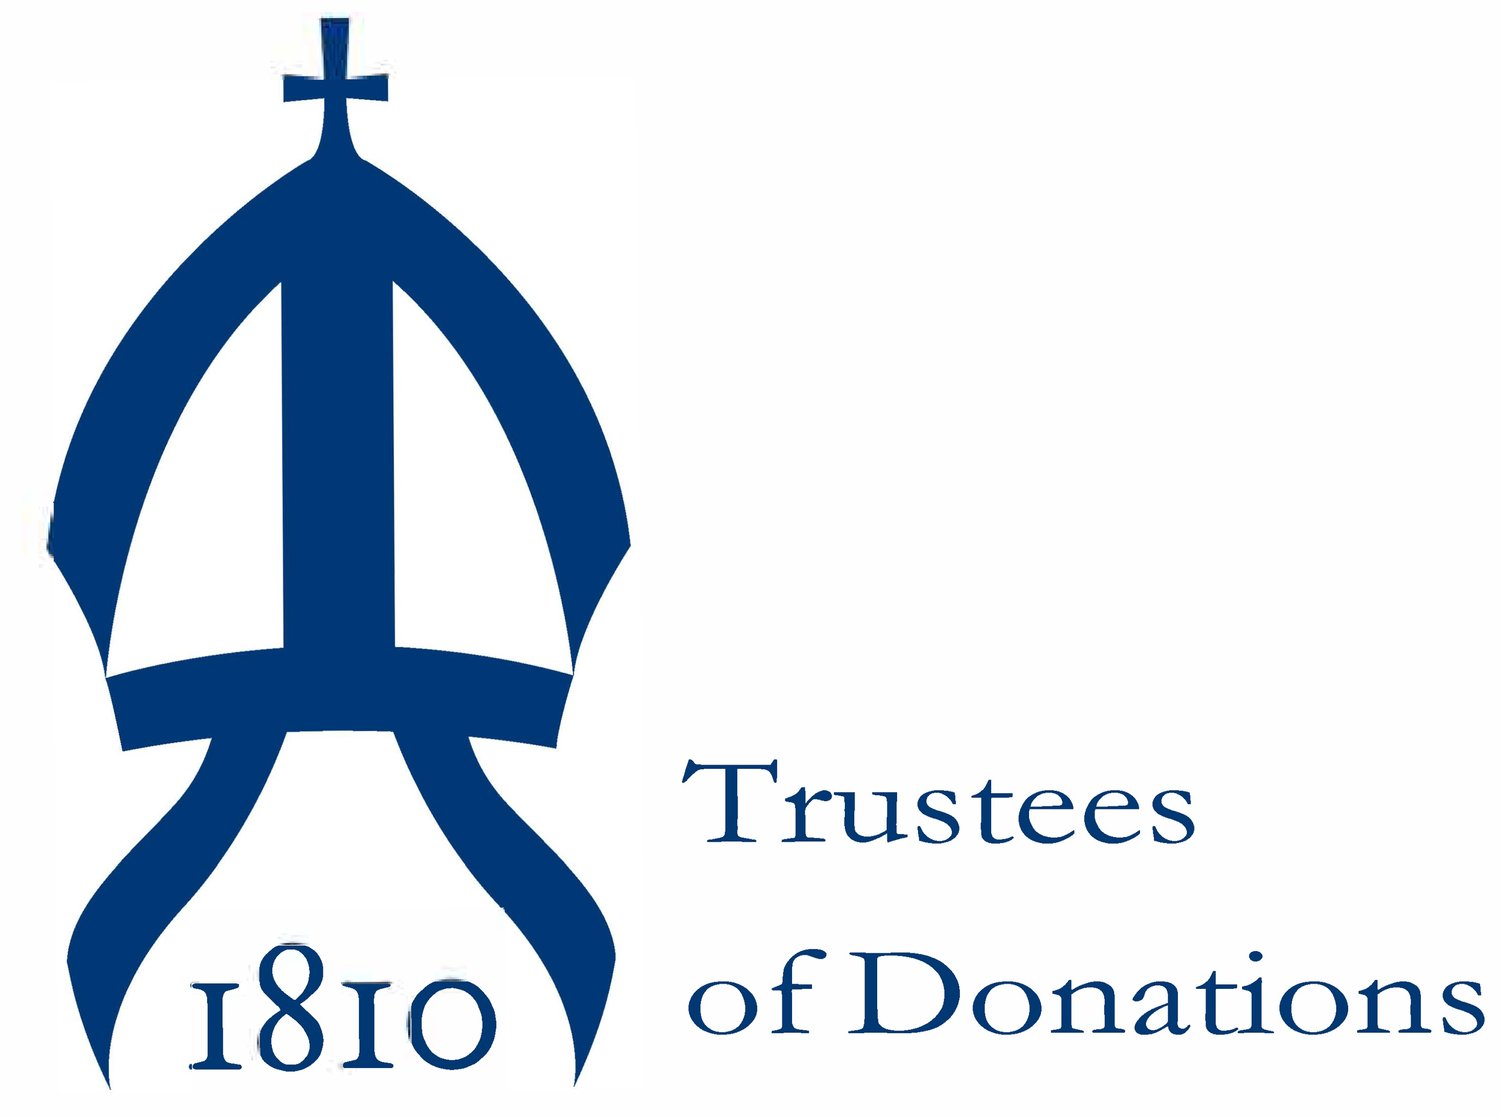 Trustees of Donations to the Protestant Episcopal Church